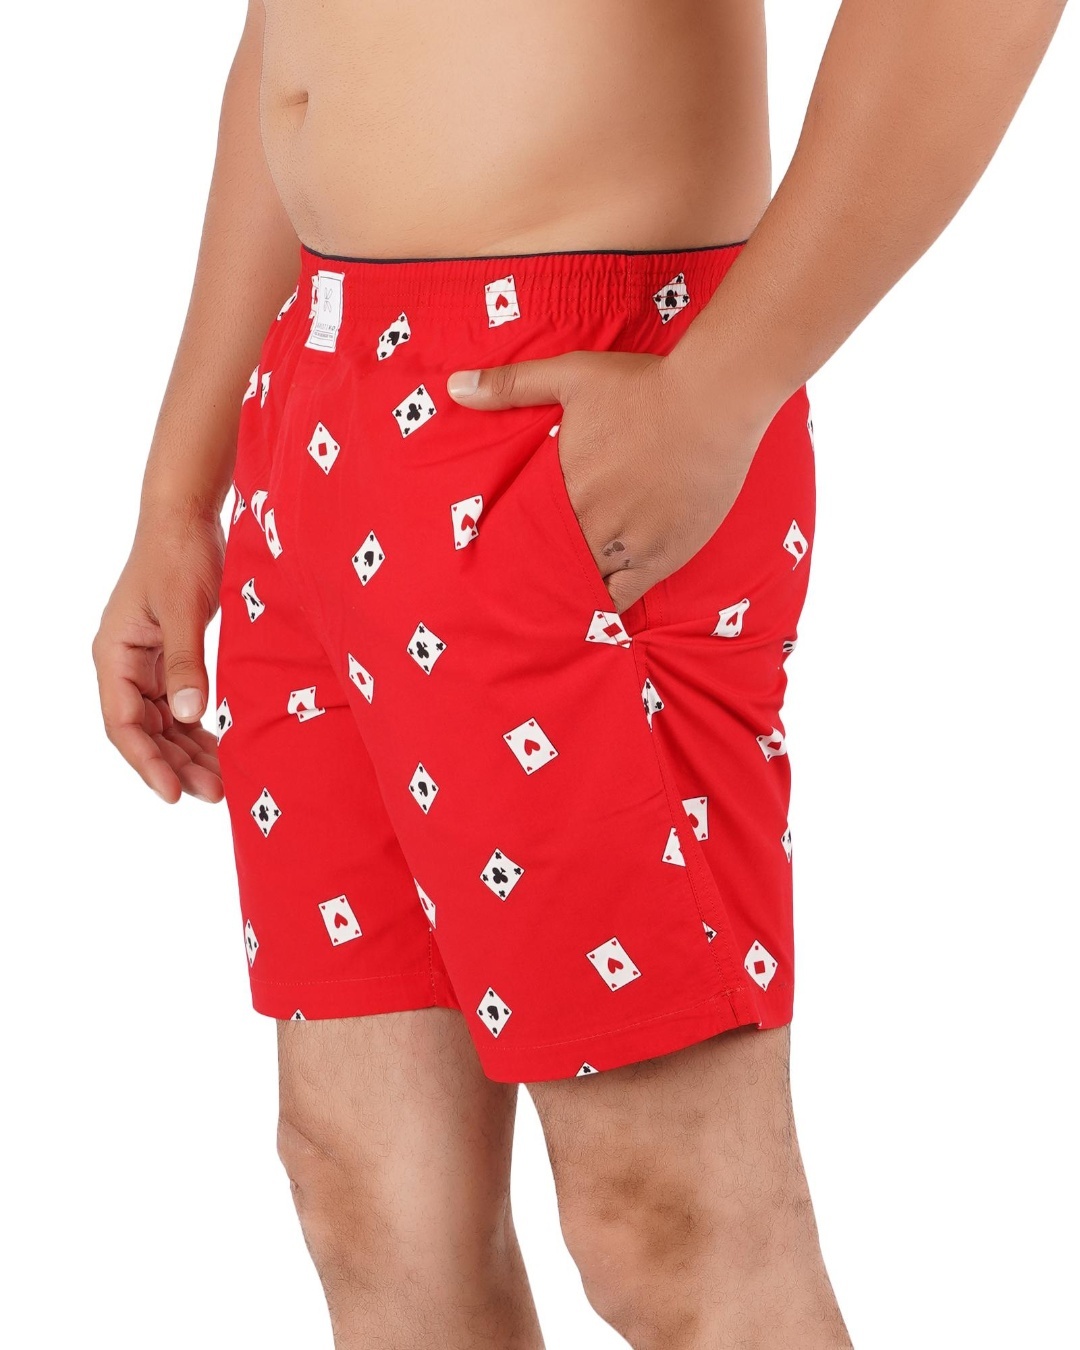 Shop Men's Red All Over Cards Printed Boxer-Back